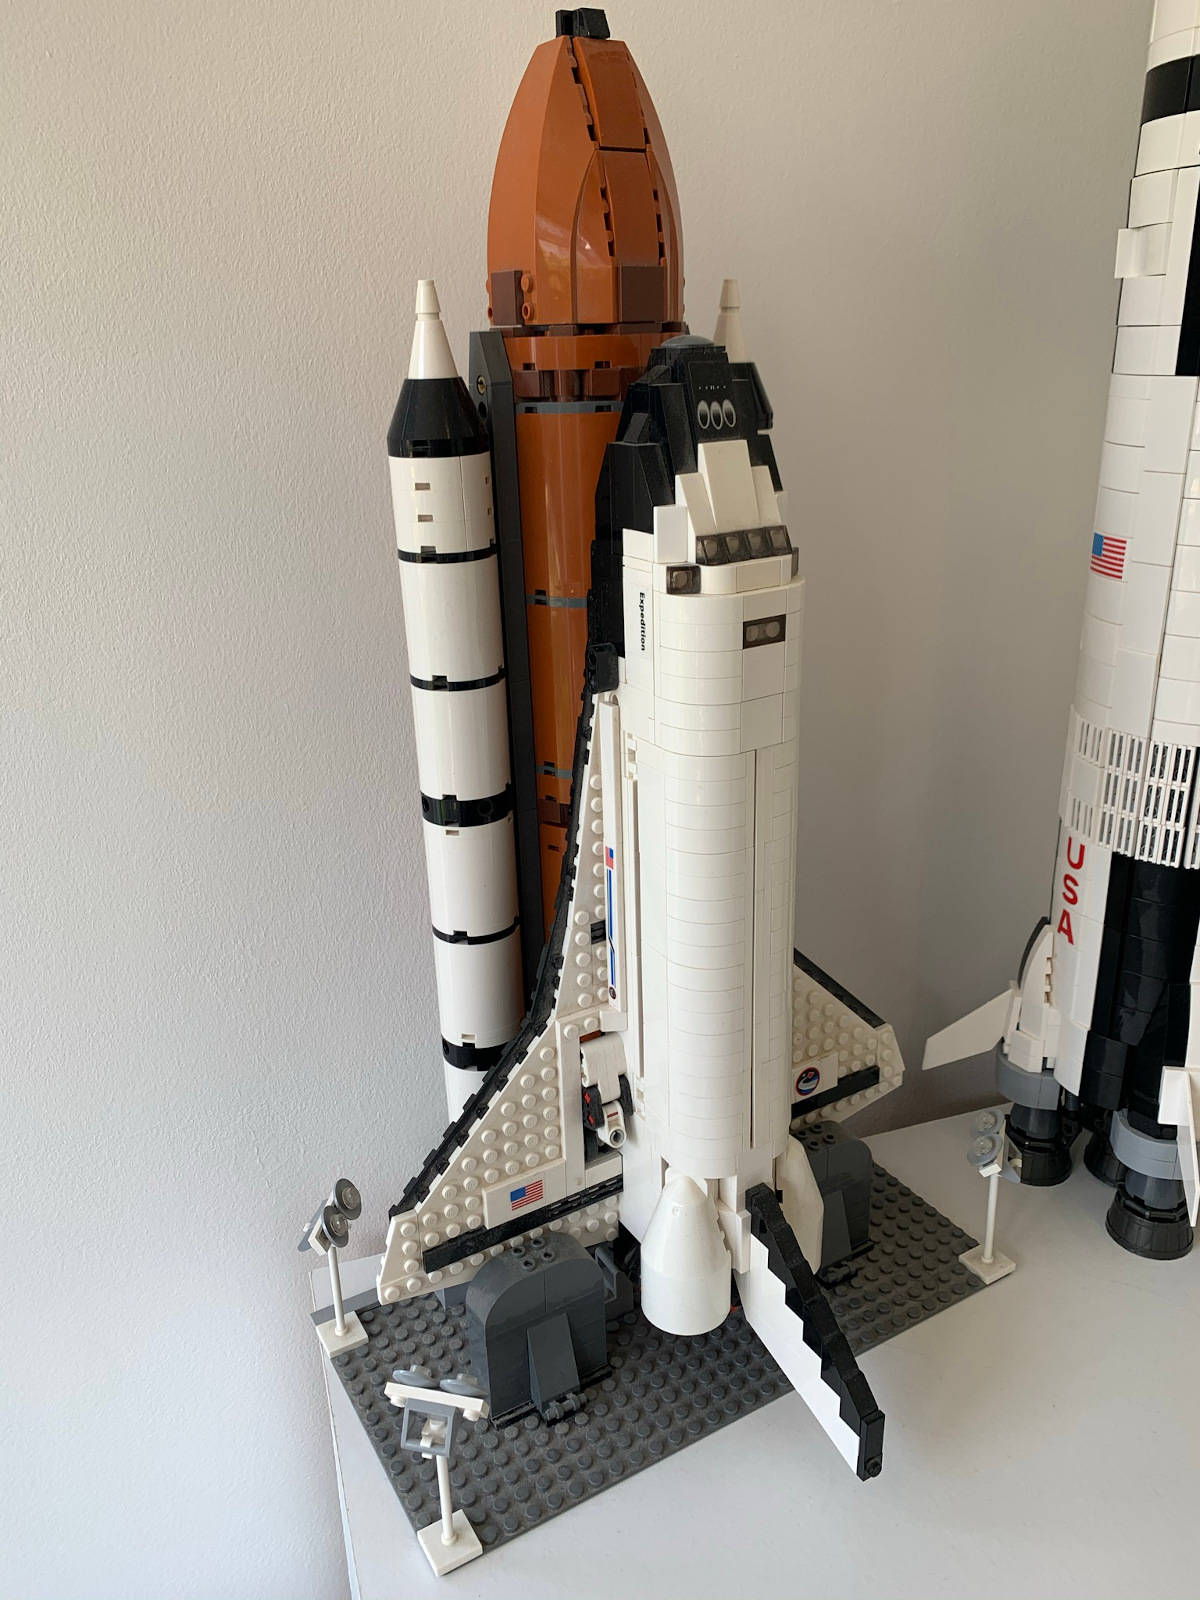 Lego's NASA Space Shuttle Discovery Model Includes Hubble